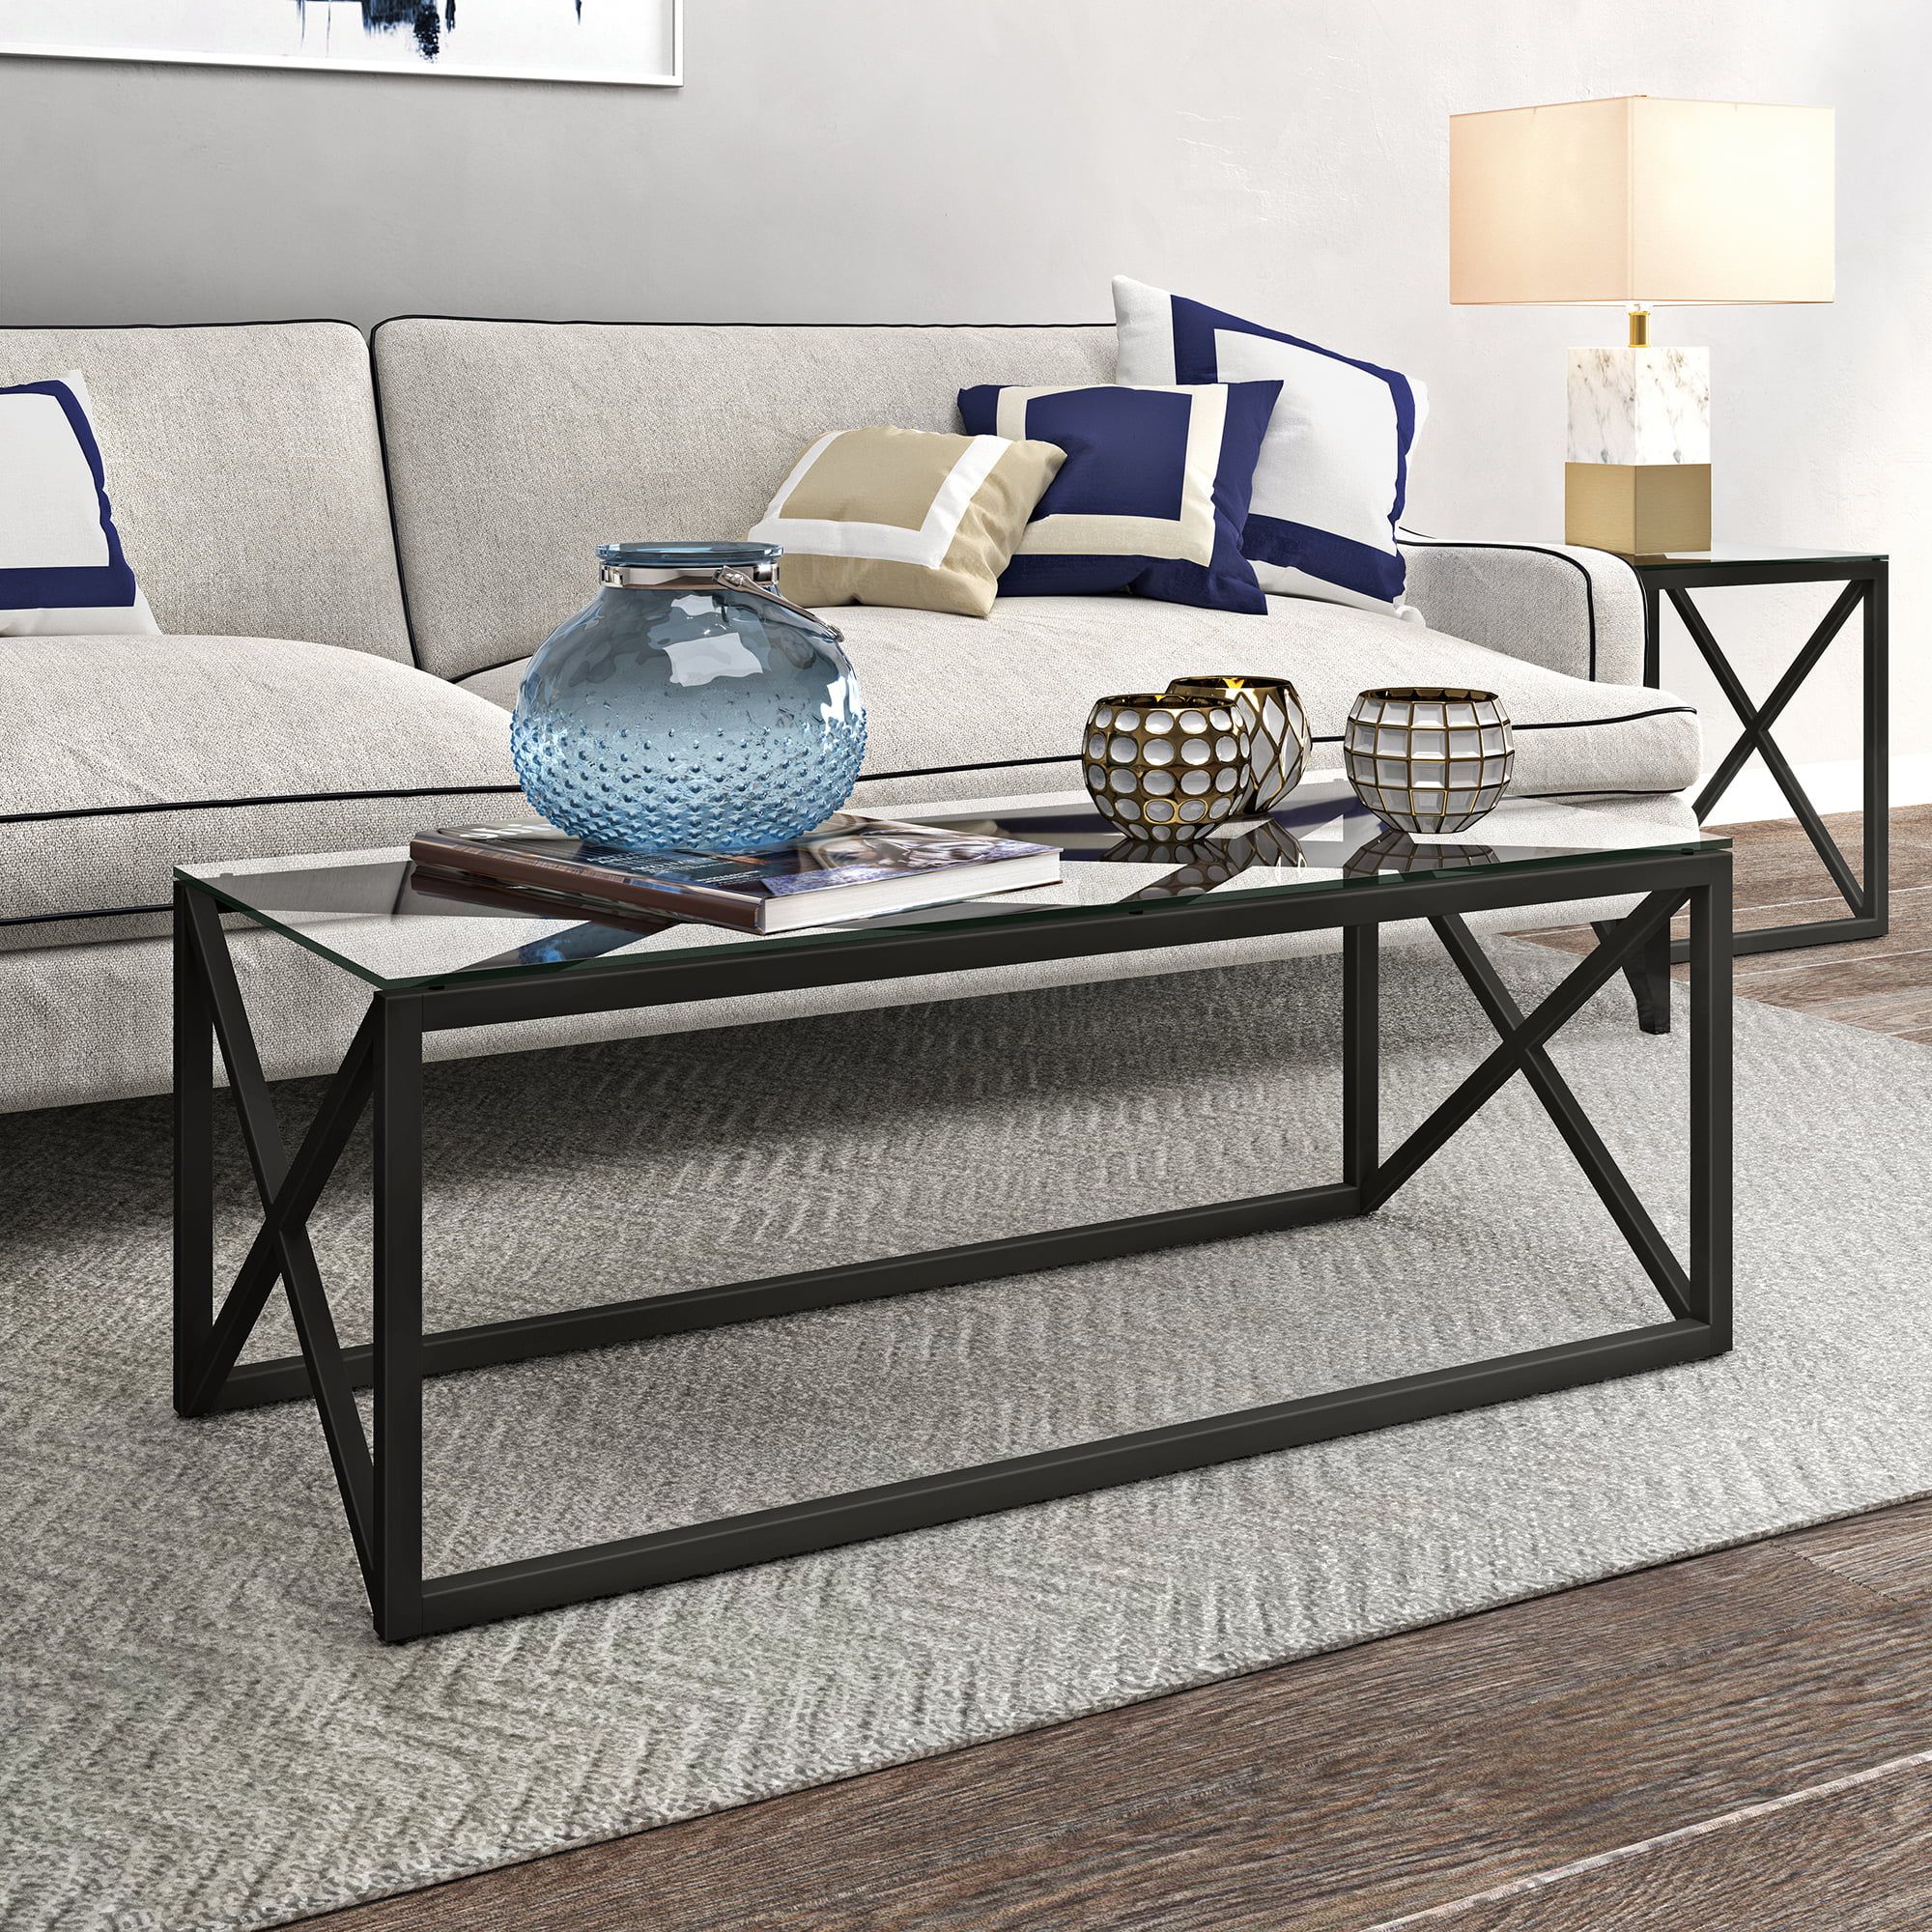 Rectangular Coffee Tables With Pedestal Bases With Widely Used Mid Century Modern Glass Coffee Table, Rectangle Accent Table In (View 10 of 15)